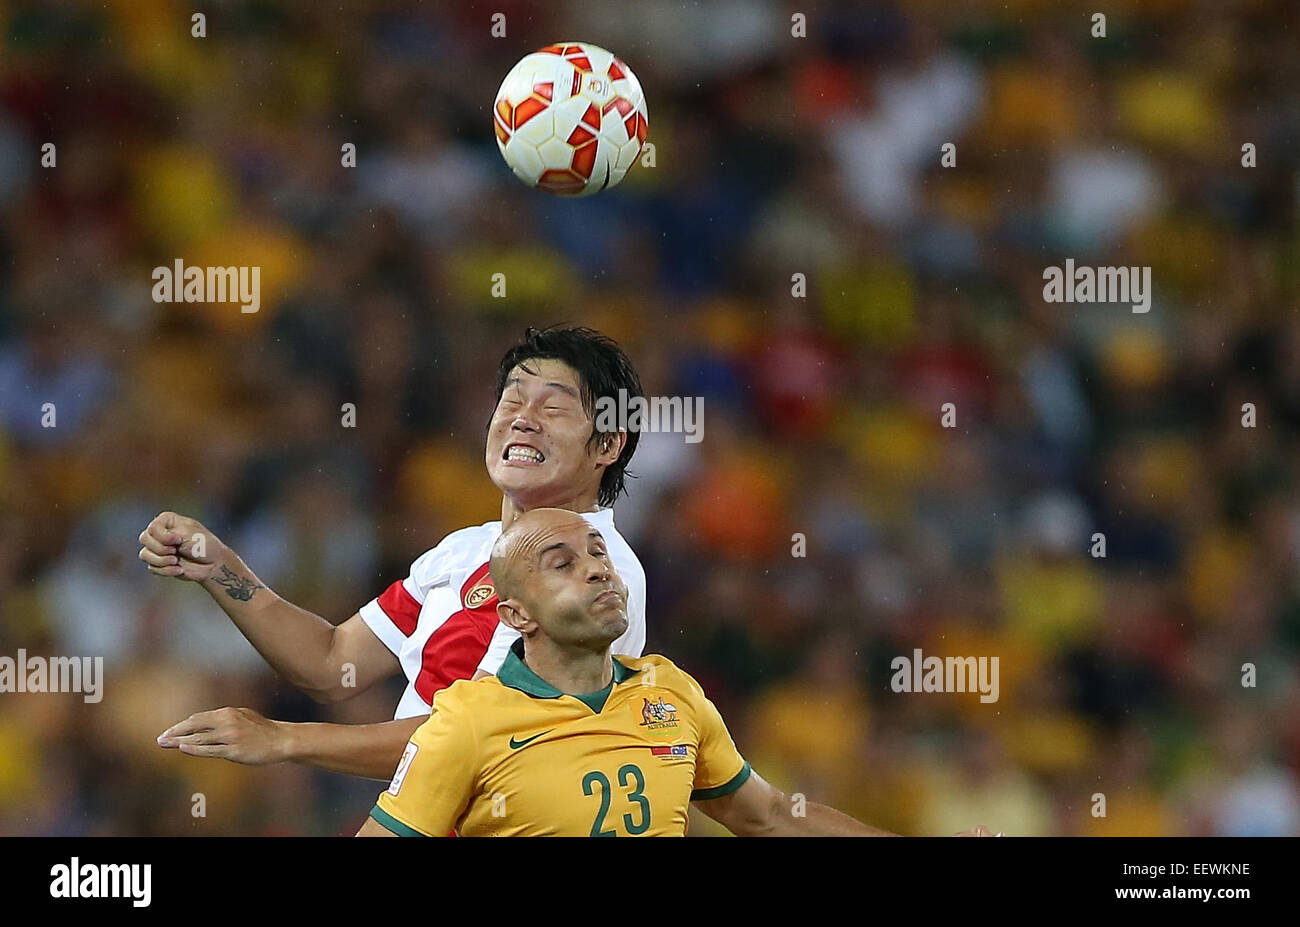 (150122) -- BRISBANE, Jan. 22, 2015(Xinhua) -- China's Cai Huikang (C) heads for the ball with Australia's Mark Bresciano during the quarterfinal match at the 2015 AFC Asian Cup in Brisbane, Australia, Jan. 22, 2015. (Xinhua/Cao Can) Stock Photo